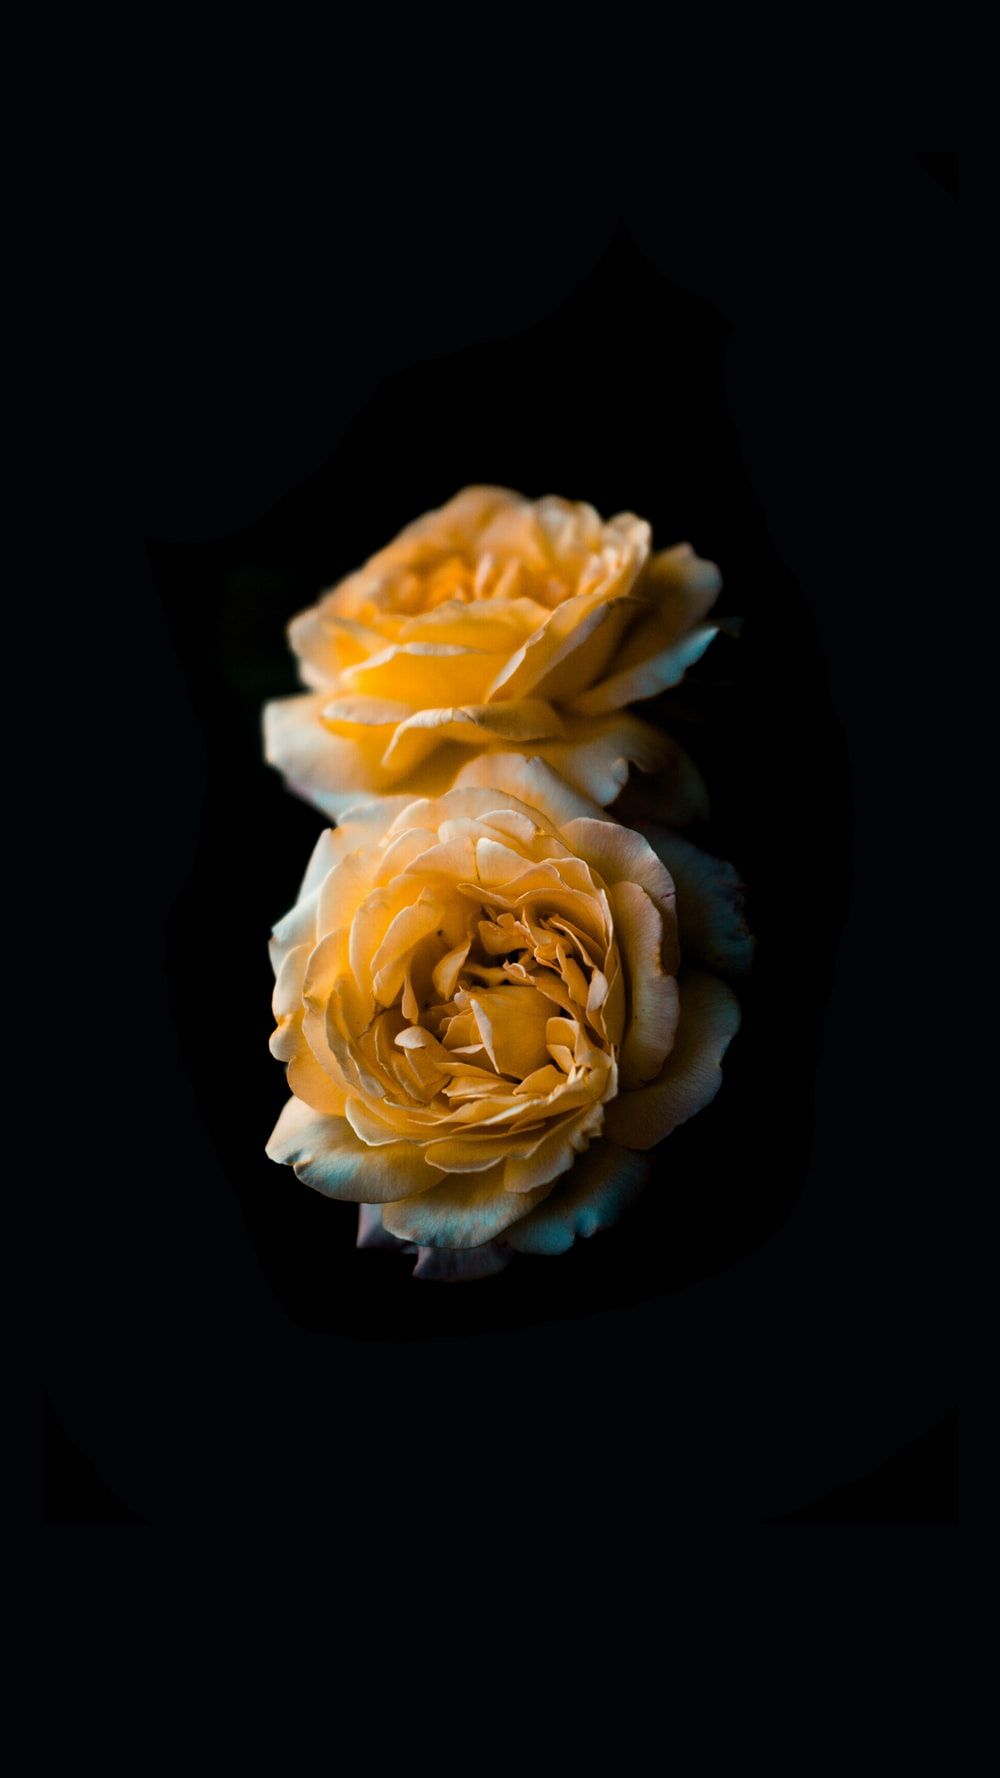 Golden Rose Picture. Download Free Image